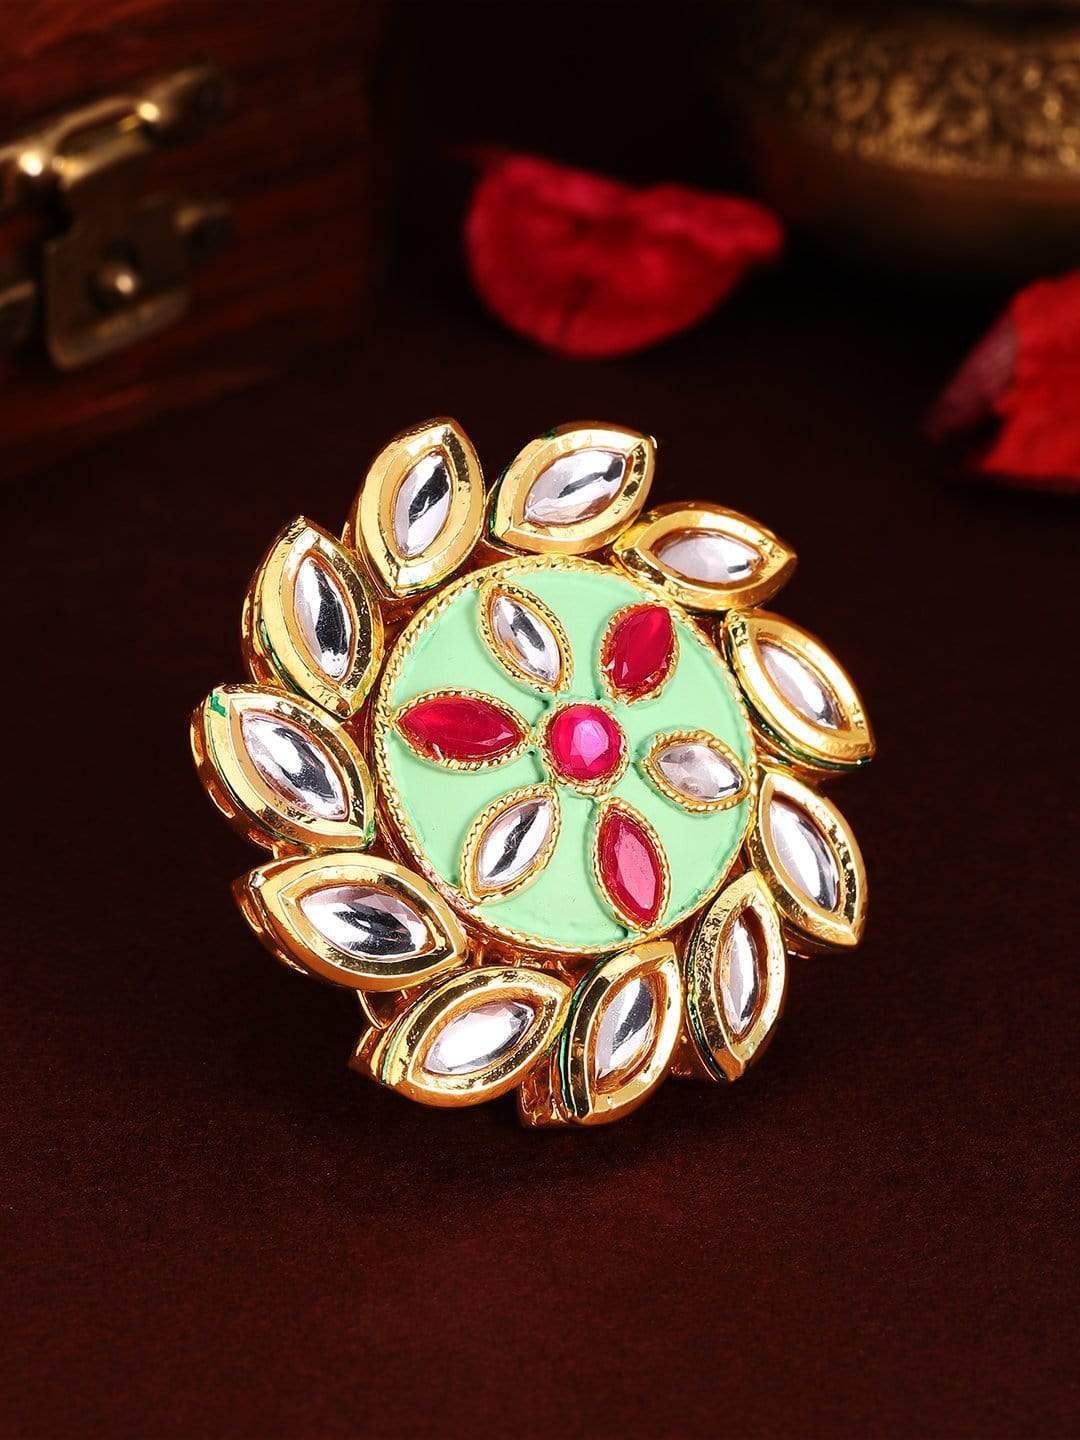 Rubans 24K Gold Plated Kundan with Mint Green Enamel Handcrafted Finger Ring Rings